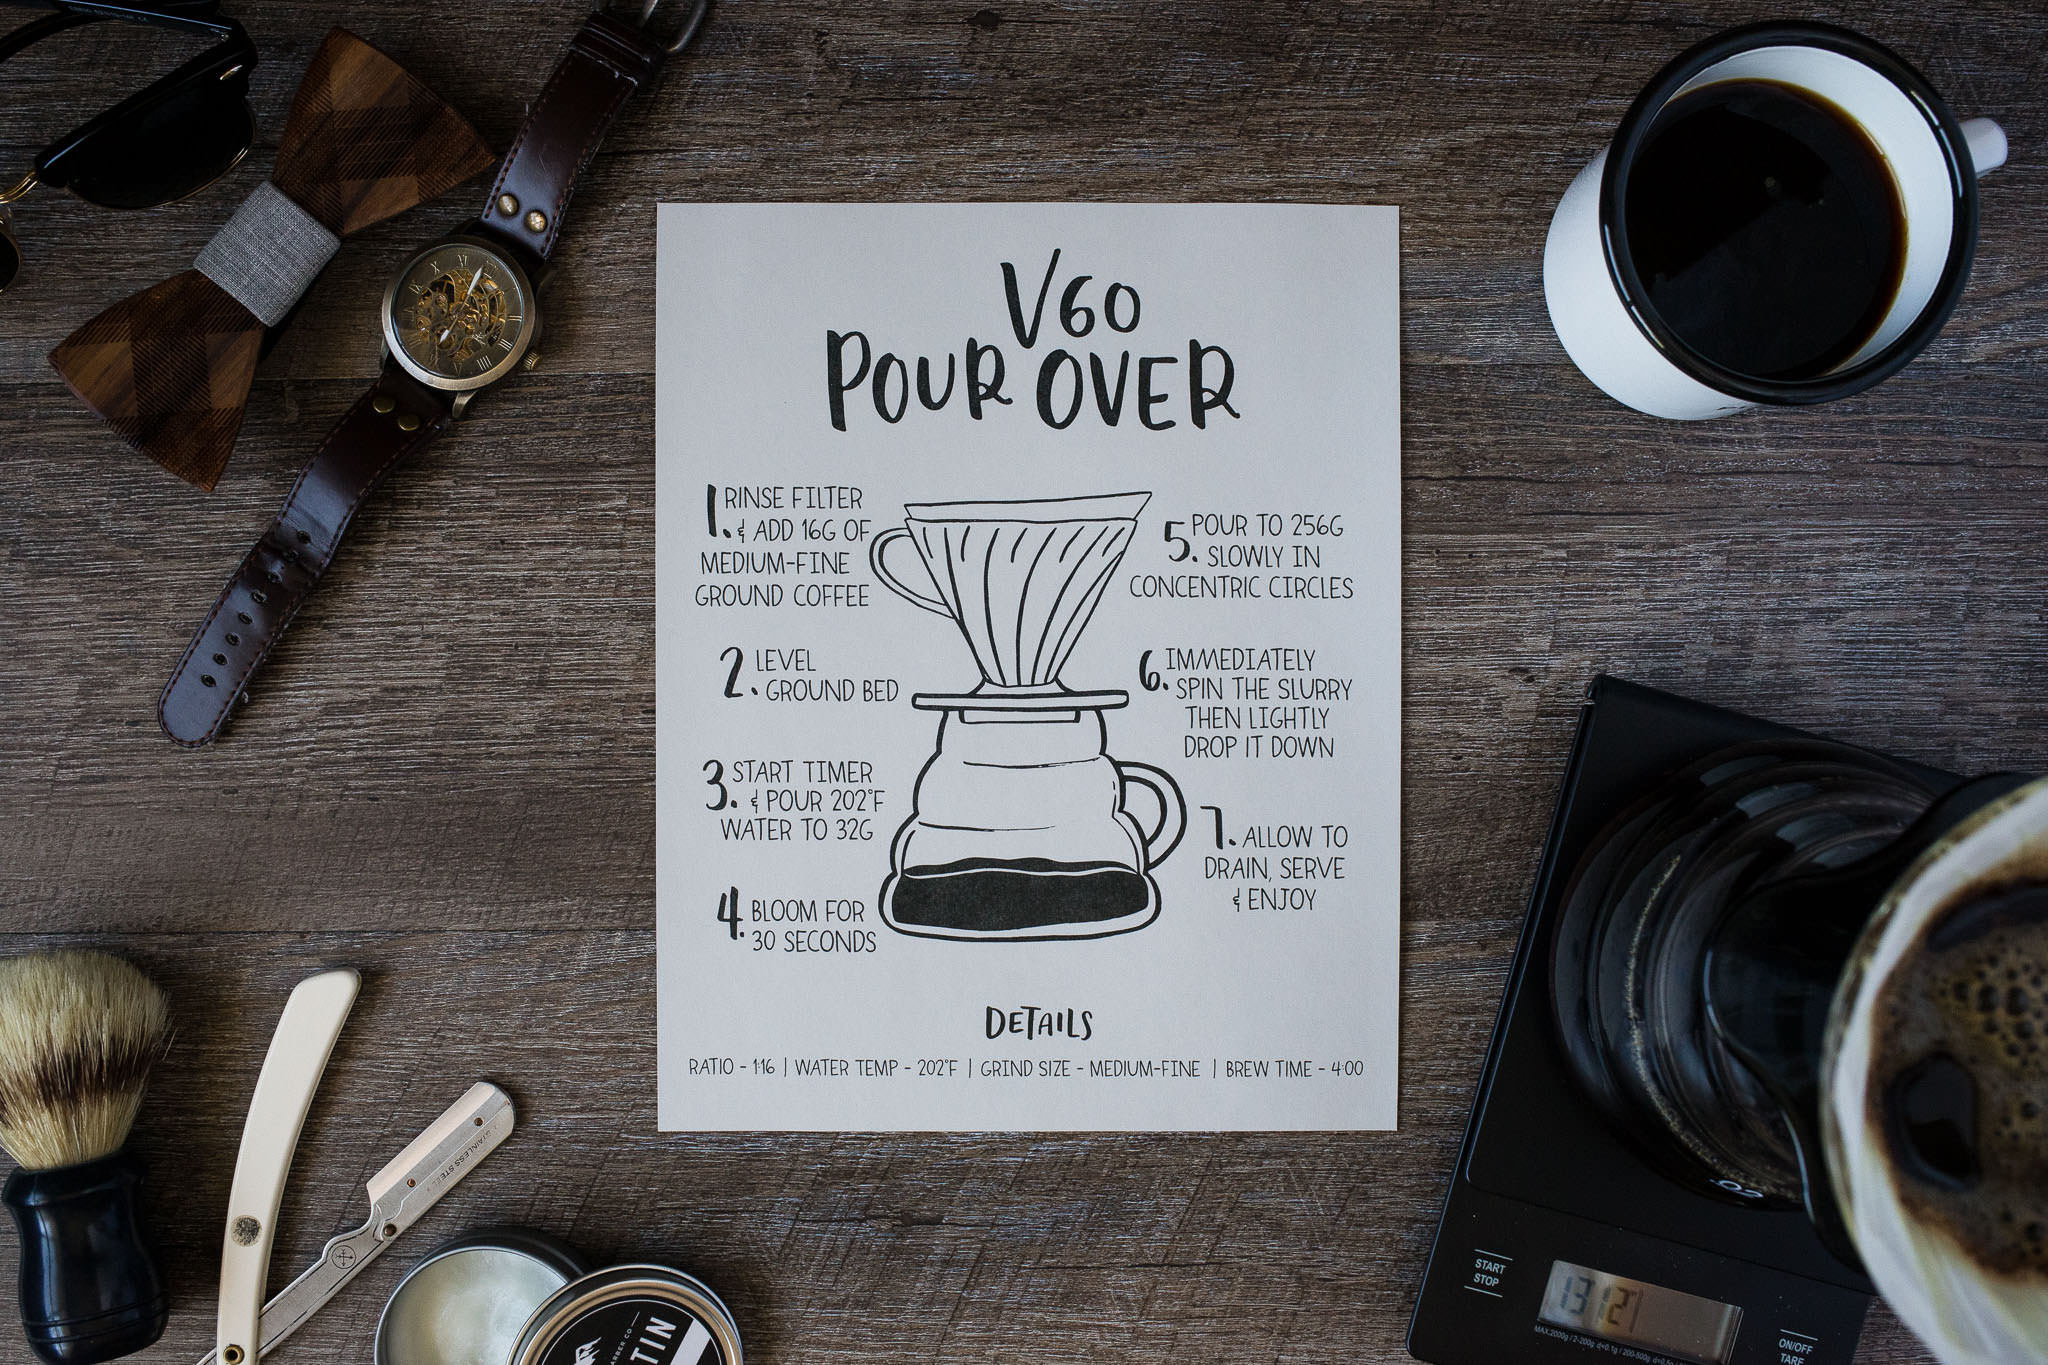 How to make pour over coffee v60 brew guide poster